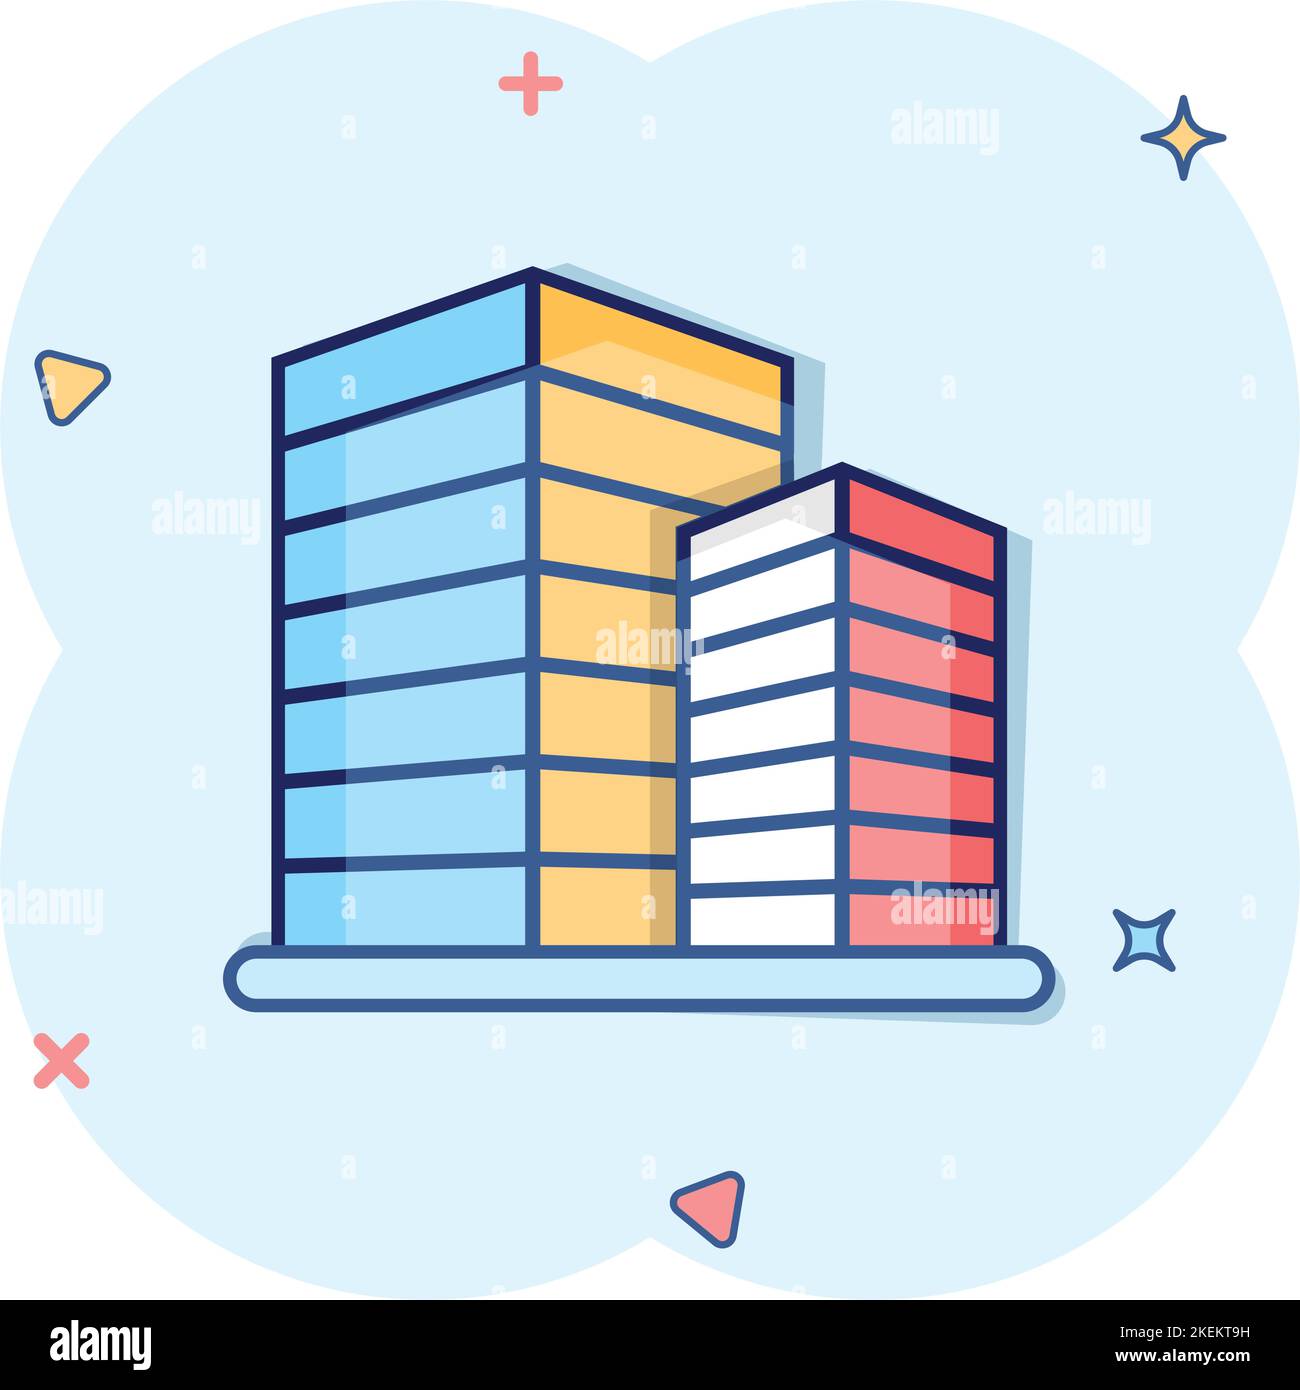 Building icon in comic style. Town skyscraper apartment cartoon vector illustration on white isolated background. City tower splash effect business co Stock Vector